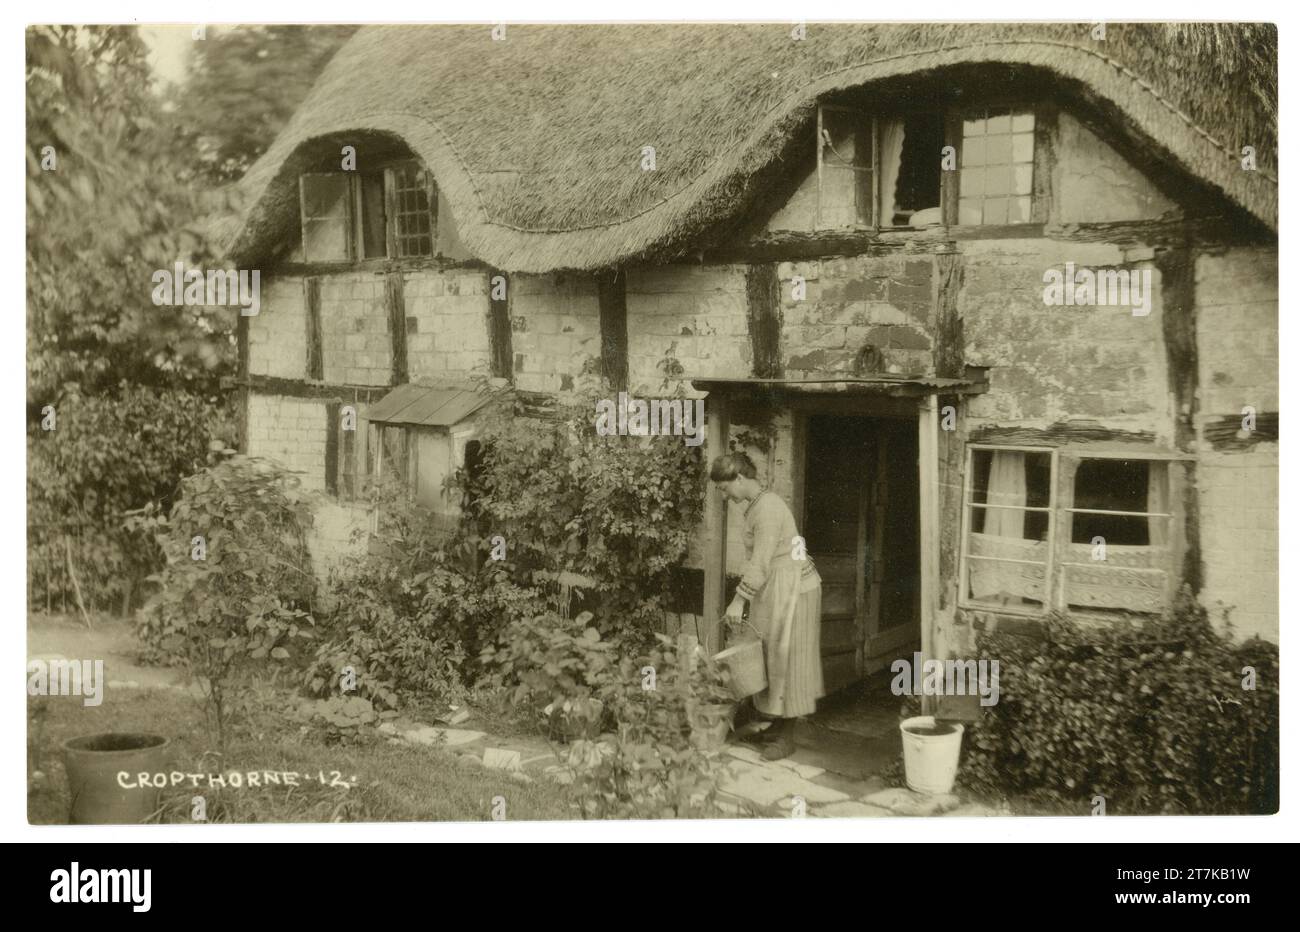 Original early1900's postcard of a lady with pail / bucket outside her charming typical English half timbered thatched cottage, vernacular architecture, dating from Medieval period, Cropthorne, Worcestershire. England, U.K. Circa 1917 Stock Photo